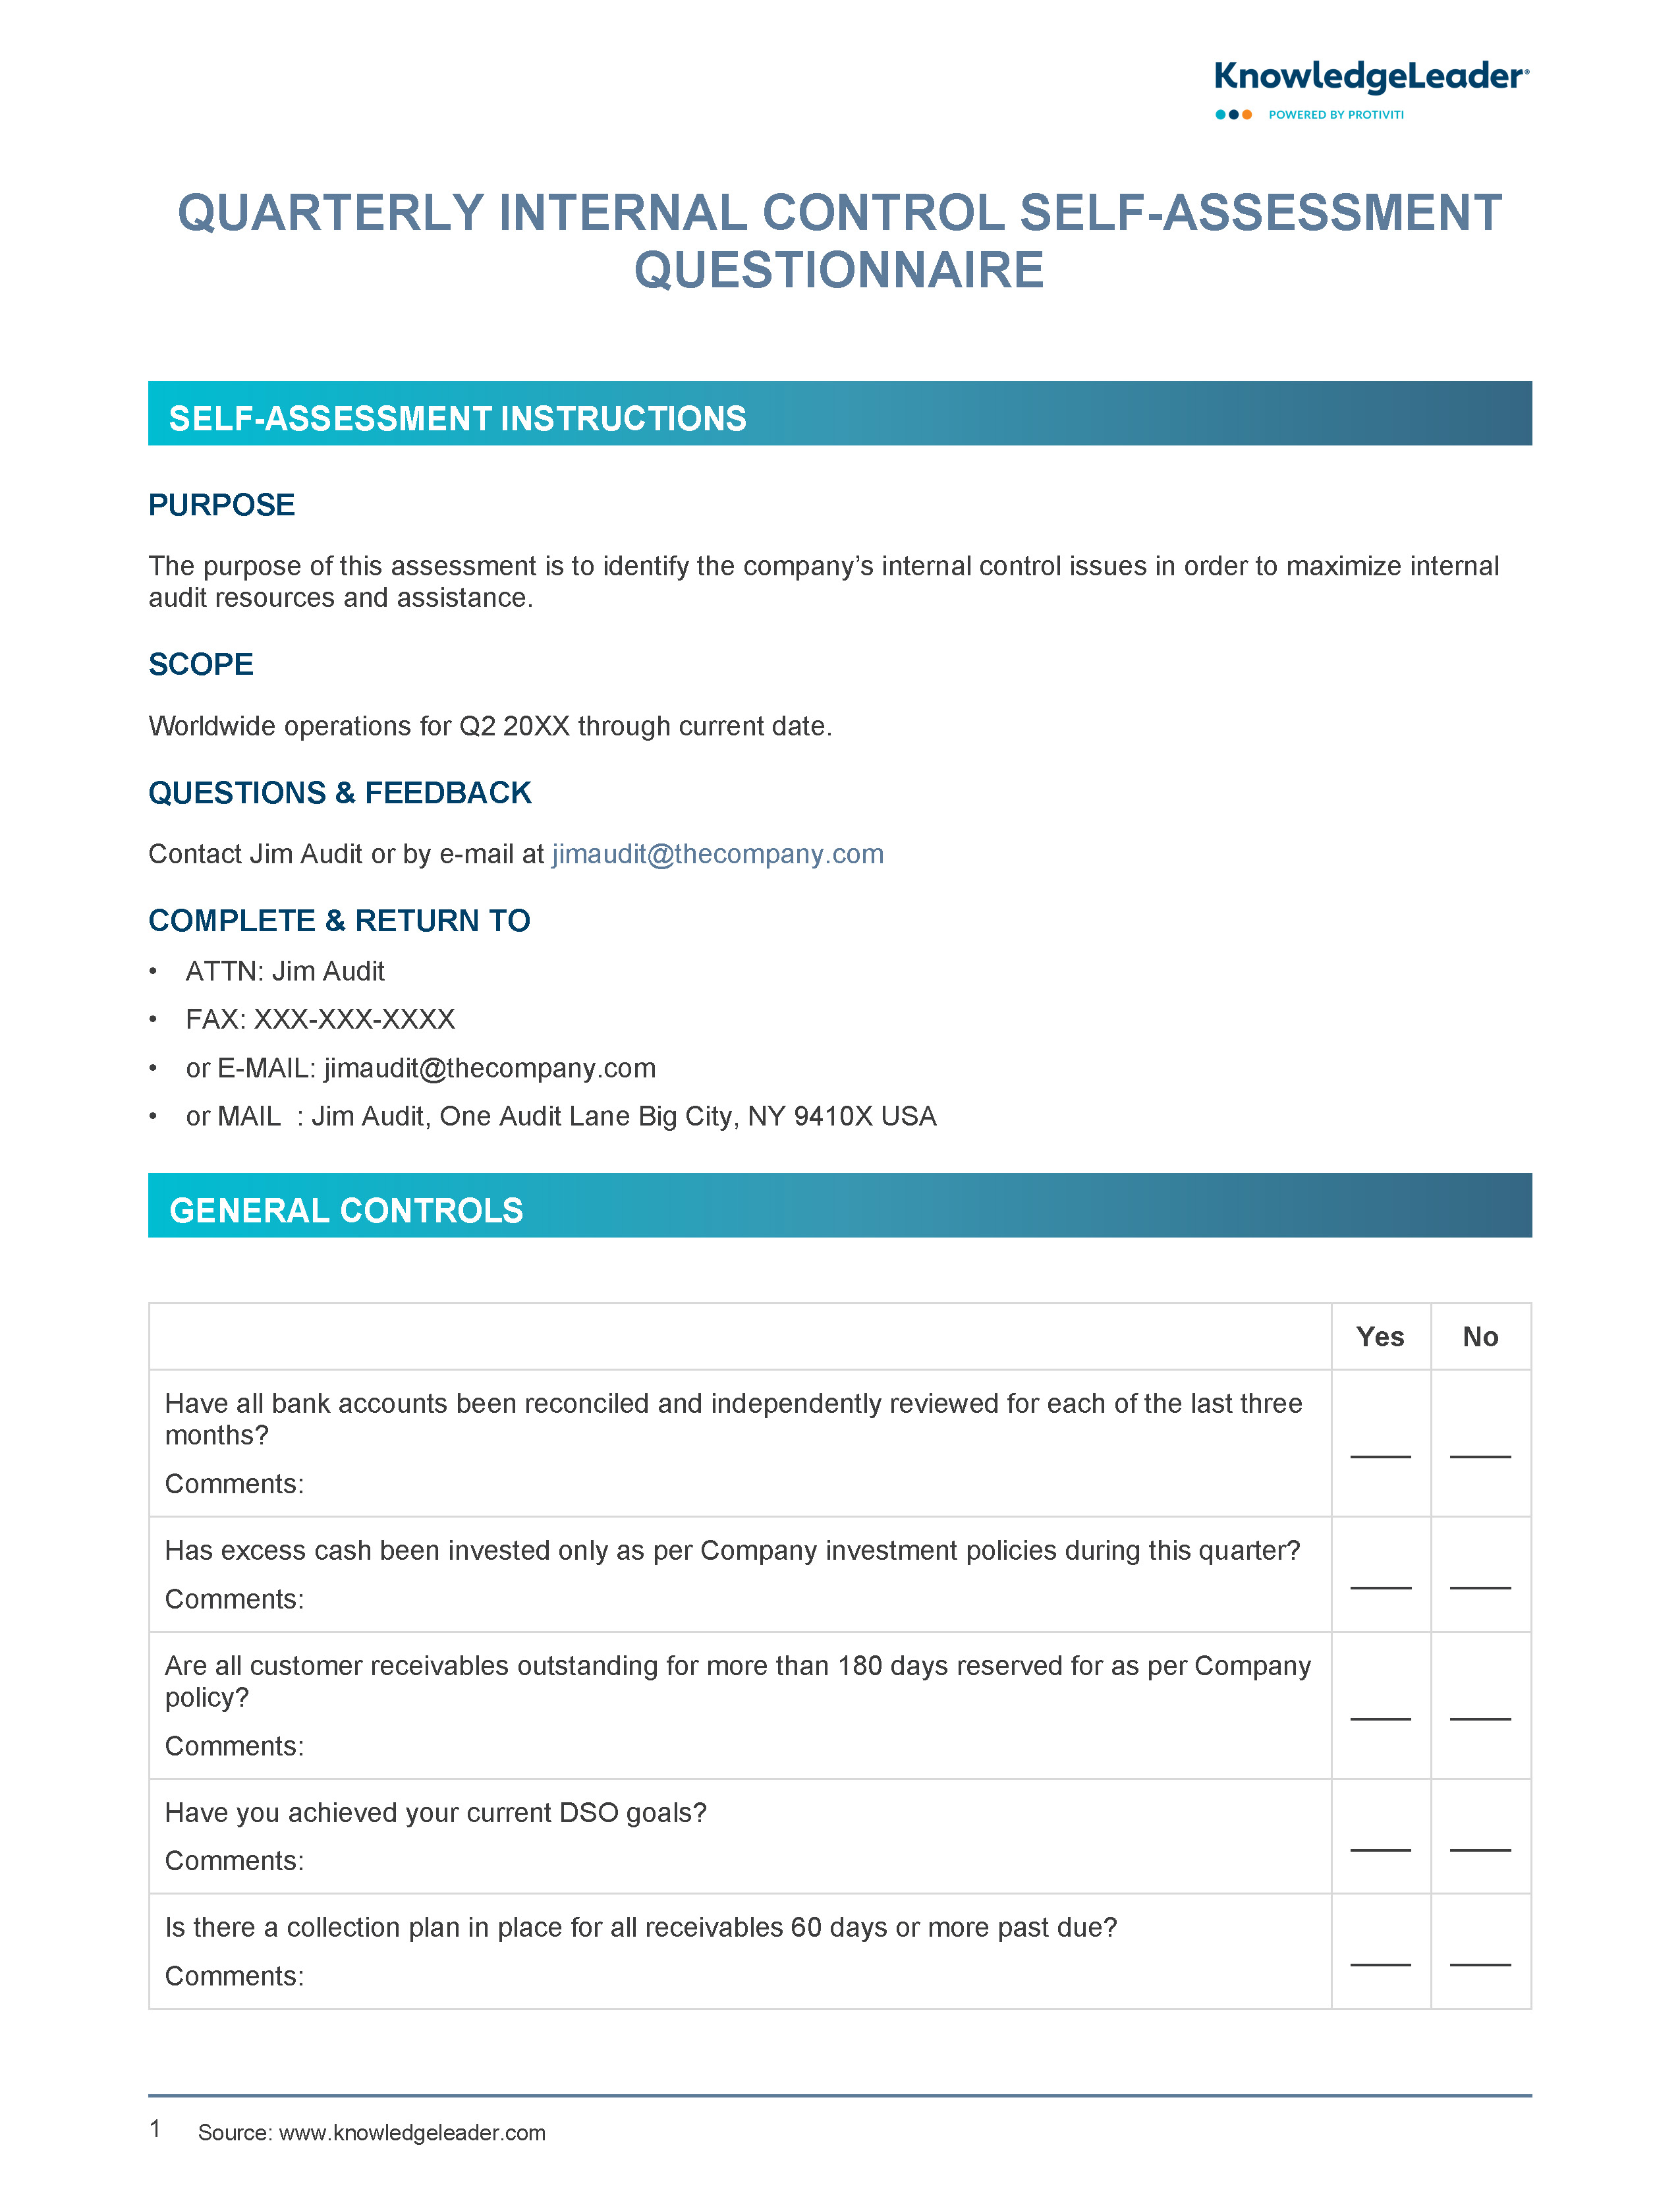 Screenshot of the first page of Quarterly Internal Control Self-Assessment